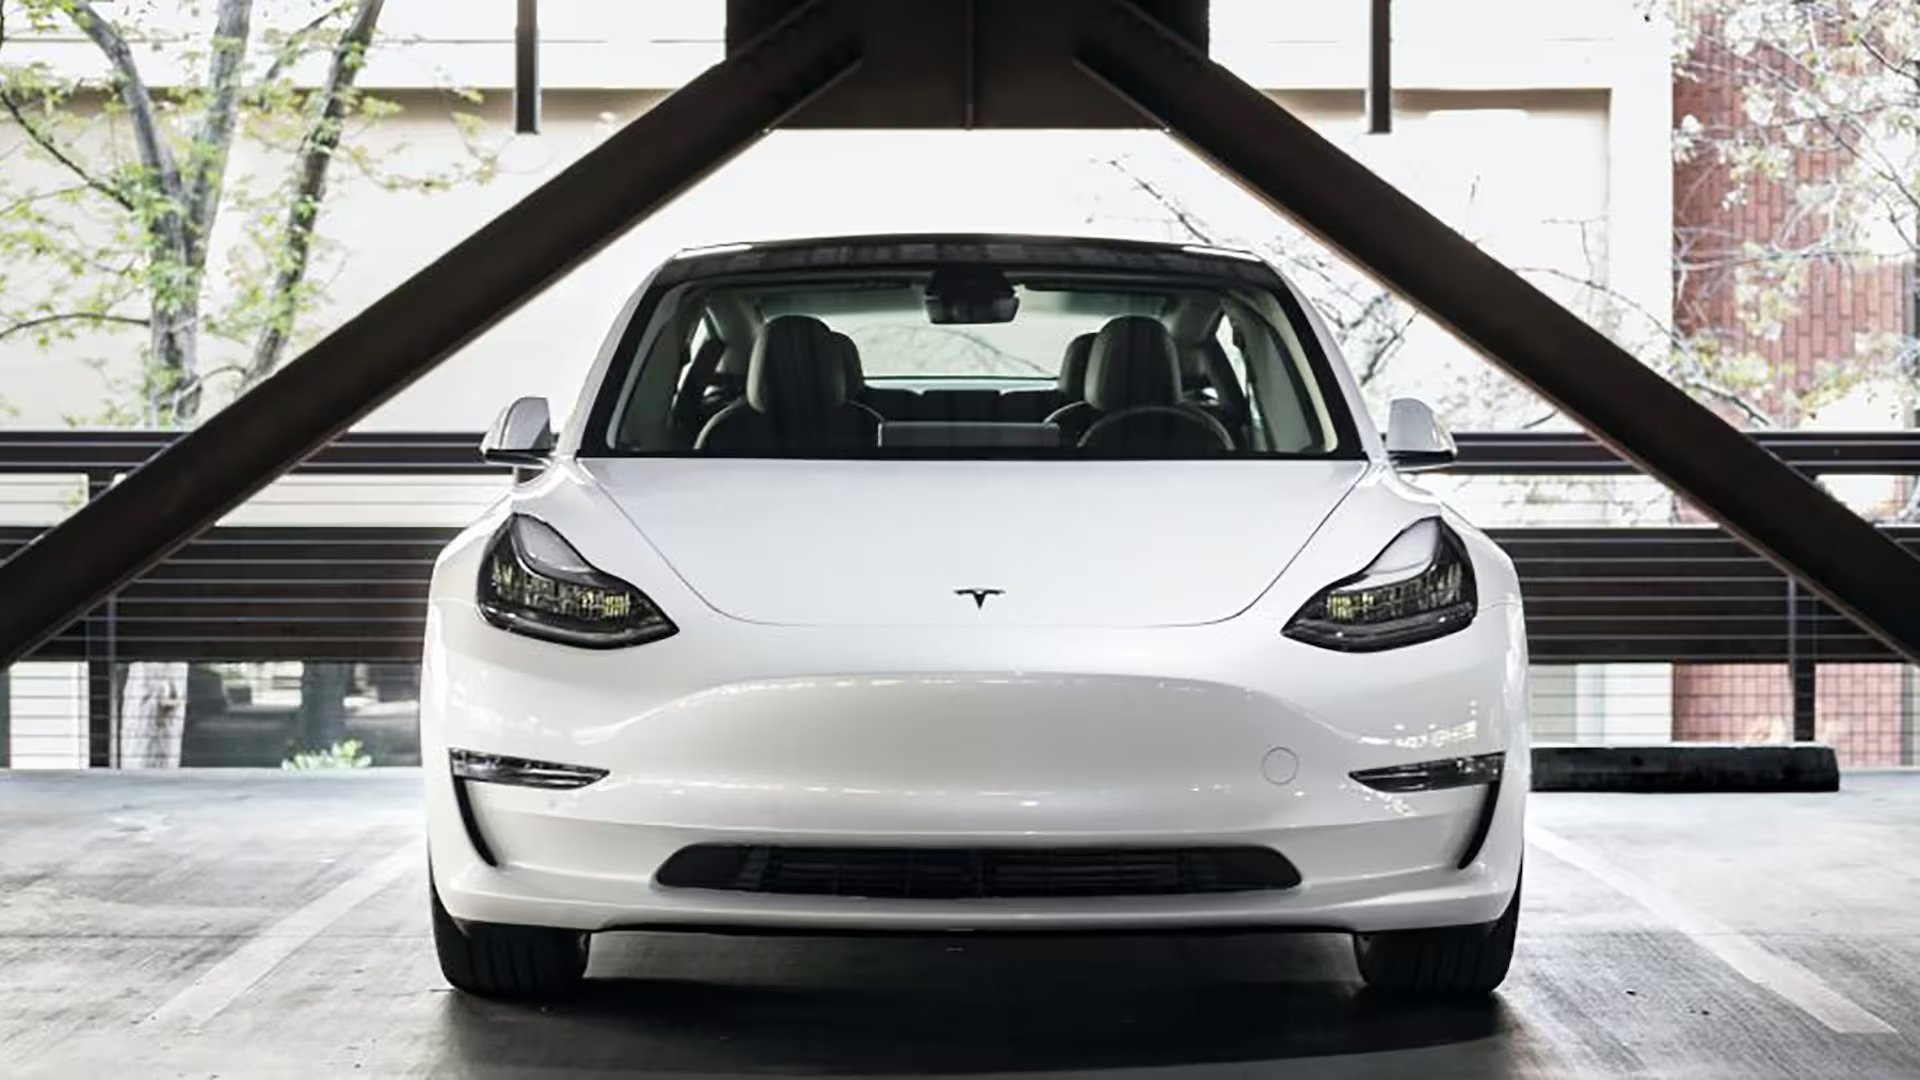 The Most and Least Driven Electric Cars in the U.S.